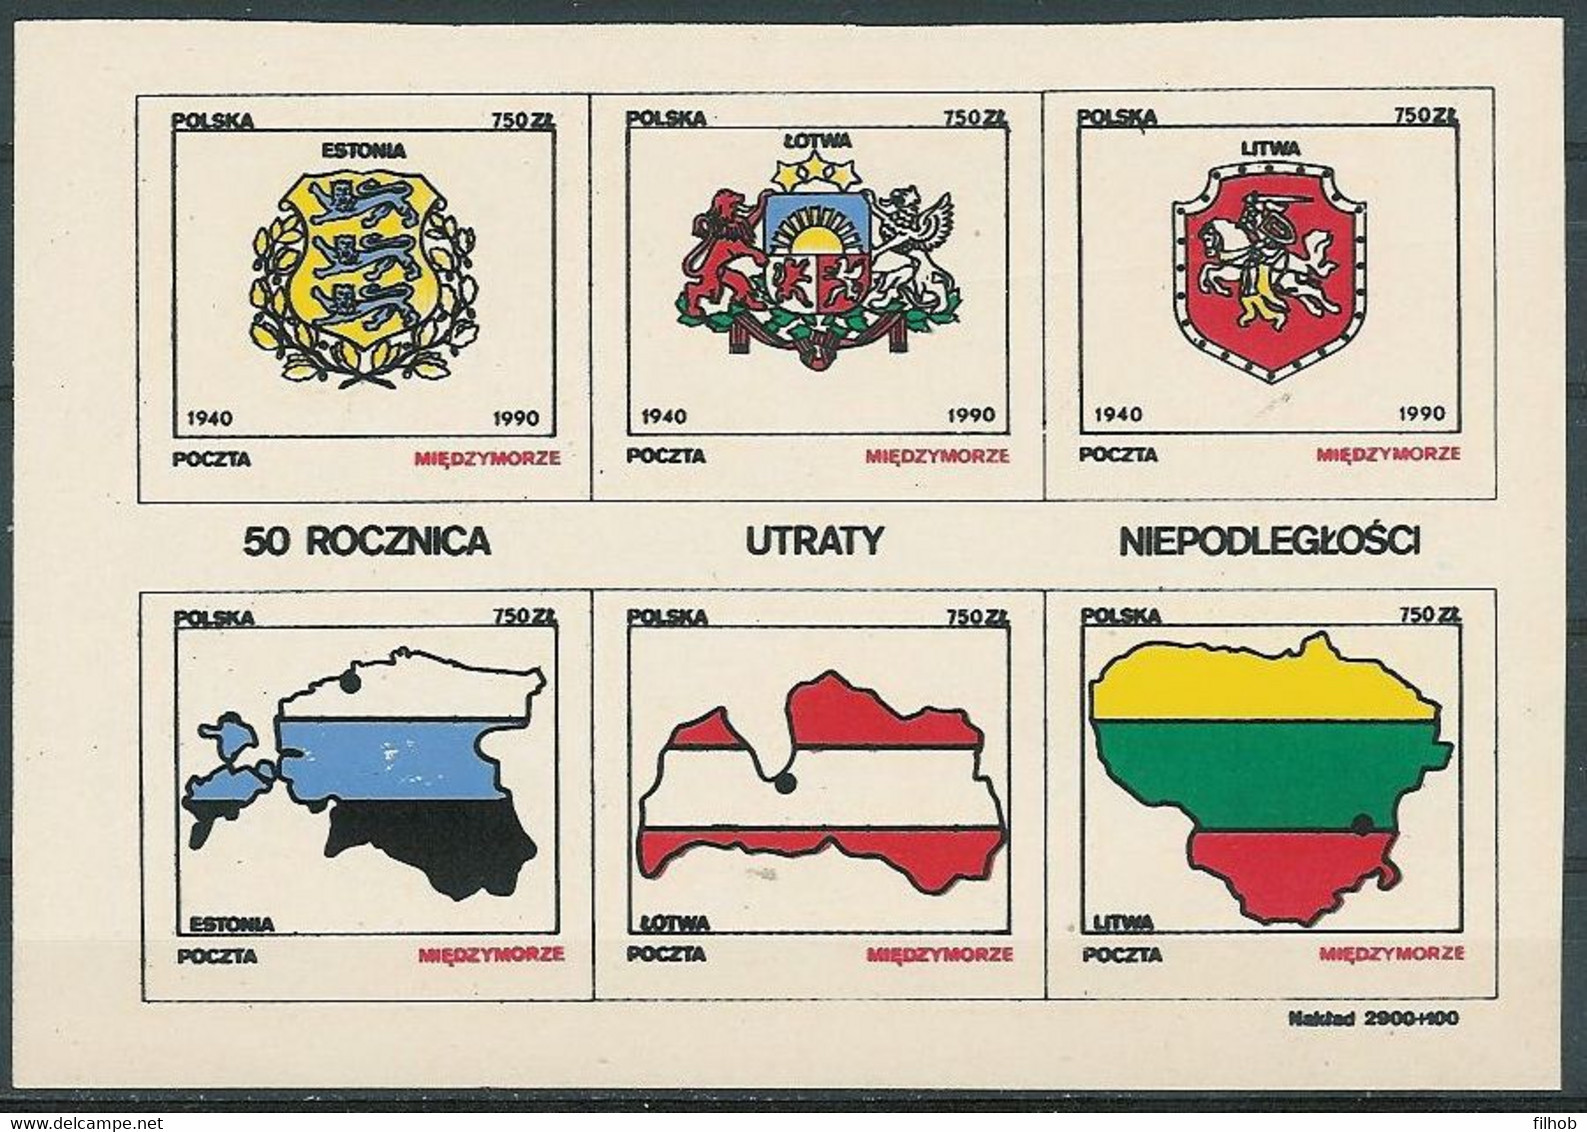 Poland SOLIDARITY (S316): Post Miedzymorze 50th Ann. Loss Of Independence Crest Map (block) - Vignettes Solidarnosc